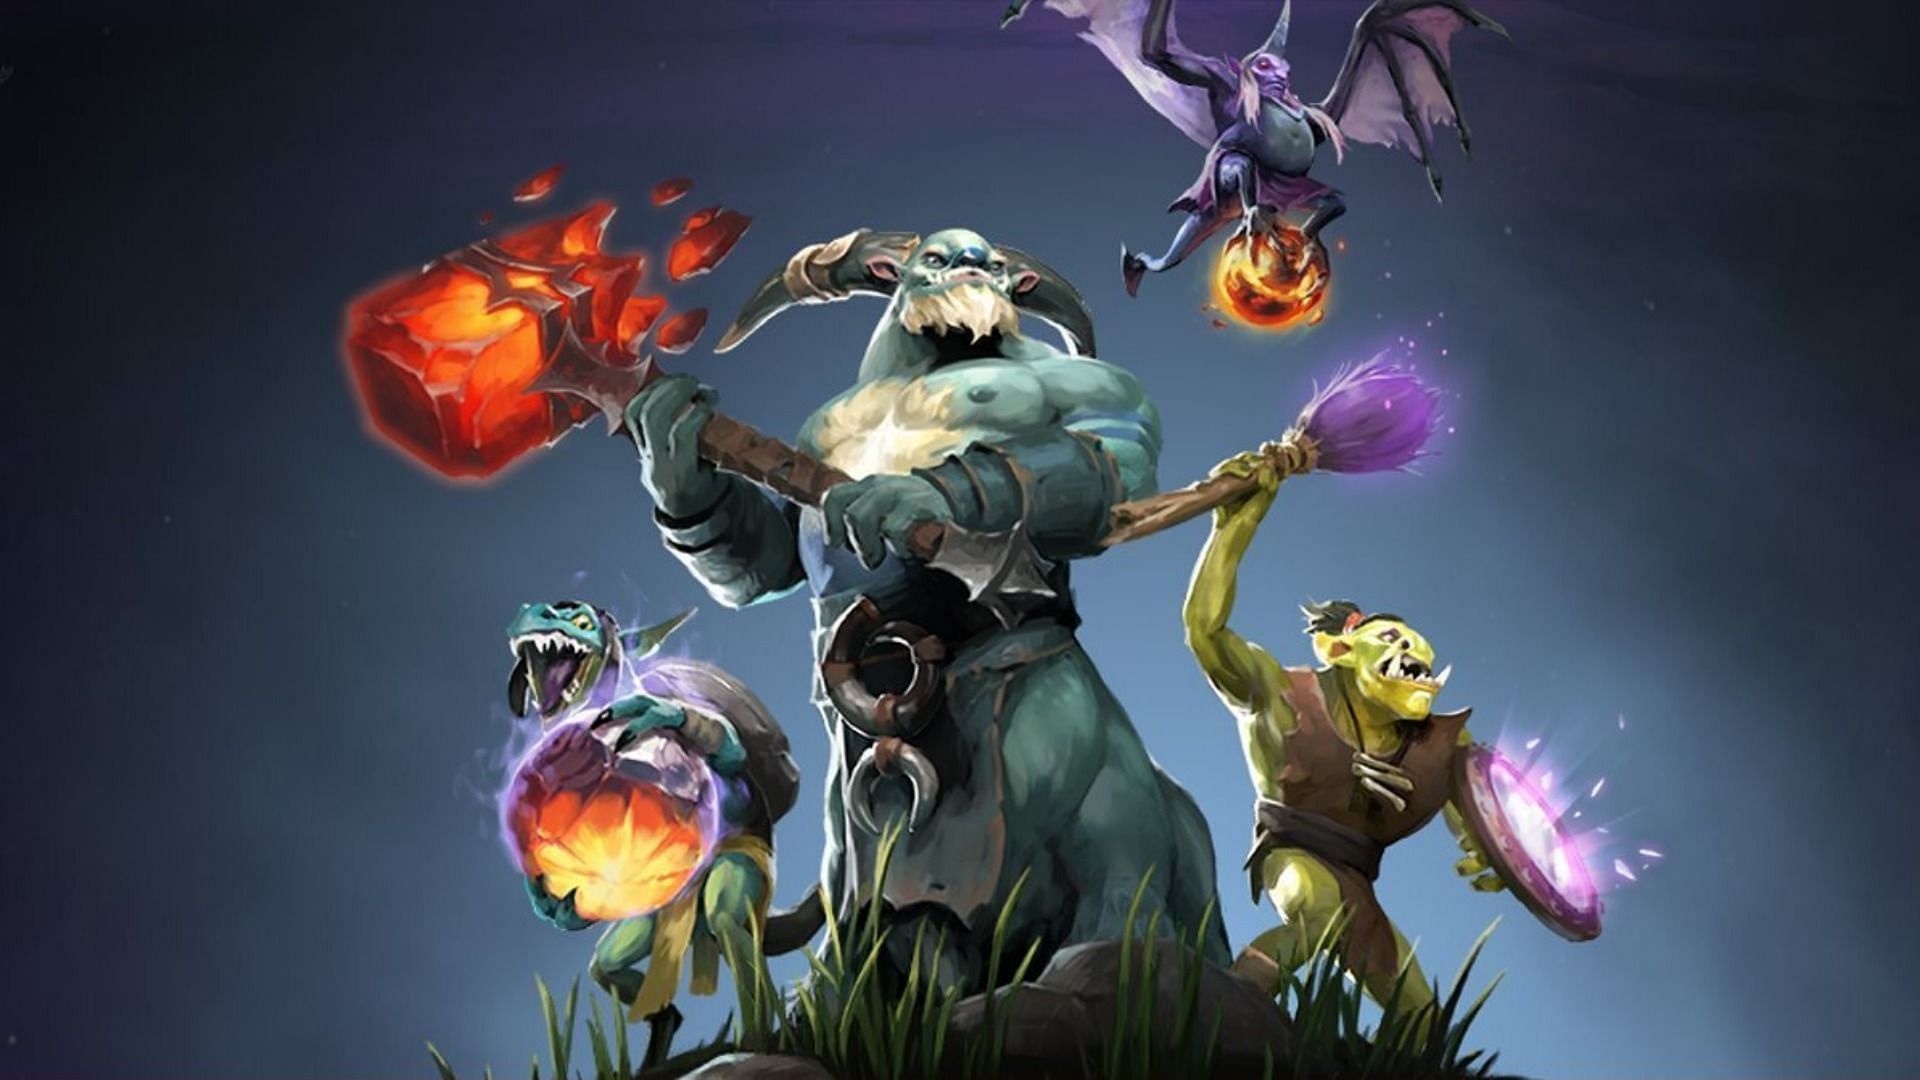 DOTA 2 patch 7.31 official notes: Primal Beast, Techies rework, community  reactions and more